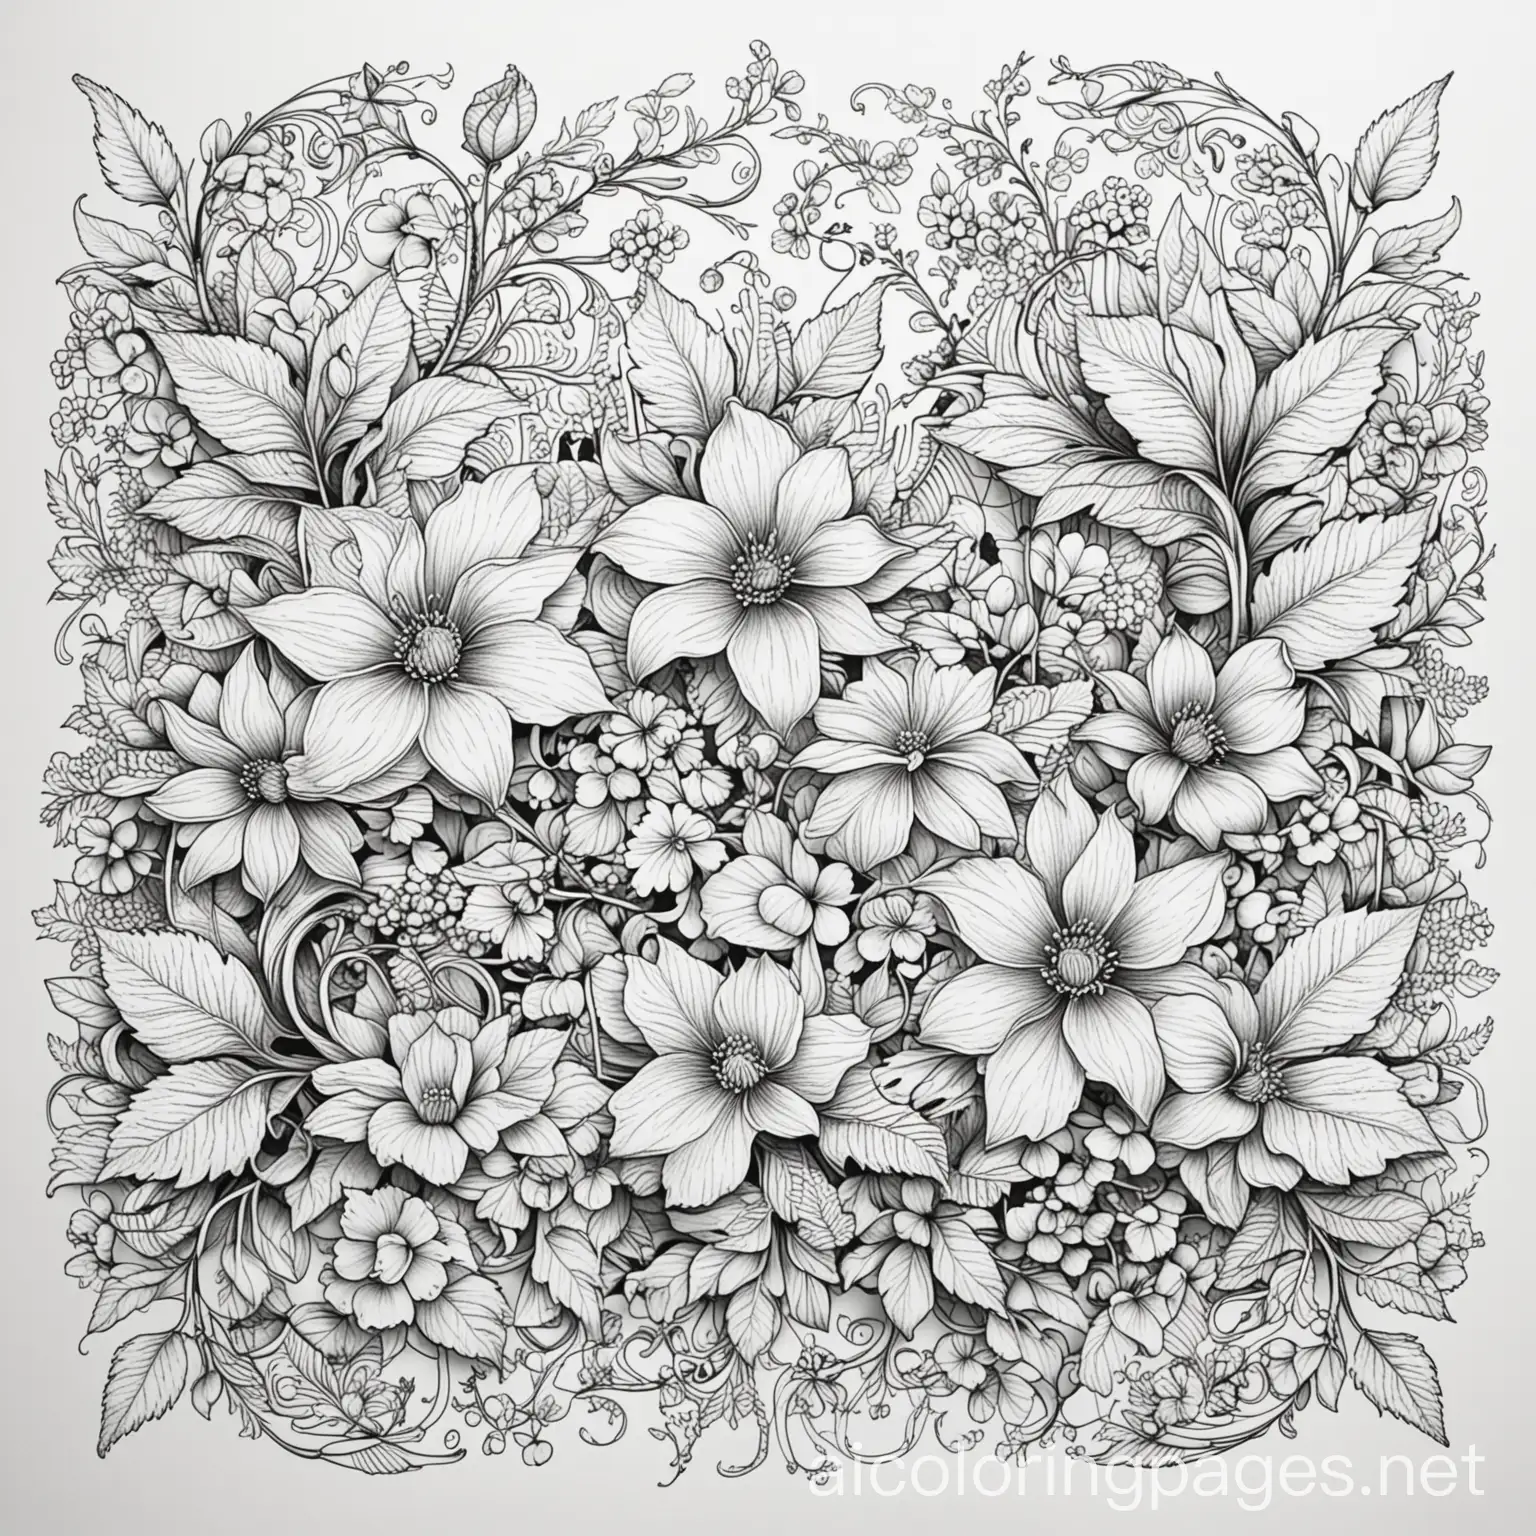 Delicate Floral Border: A thick border of intricate flowers and vines. Centerpiece Flower: A large, detailed flower in the middle. Flowing Vines: Vines extending from the centerpiece flower, interwoven with smaller flowers.  line art drawing, white background , Coloring Page, black and white, line art, white background, Simplicity, Ample White Space. The background of the coloring page is plain white to make it easy for young children to color within the lines. The outlines of all the subjects are easy to distinguish, making it simple for kids to color without too much difficulty